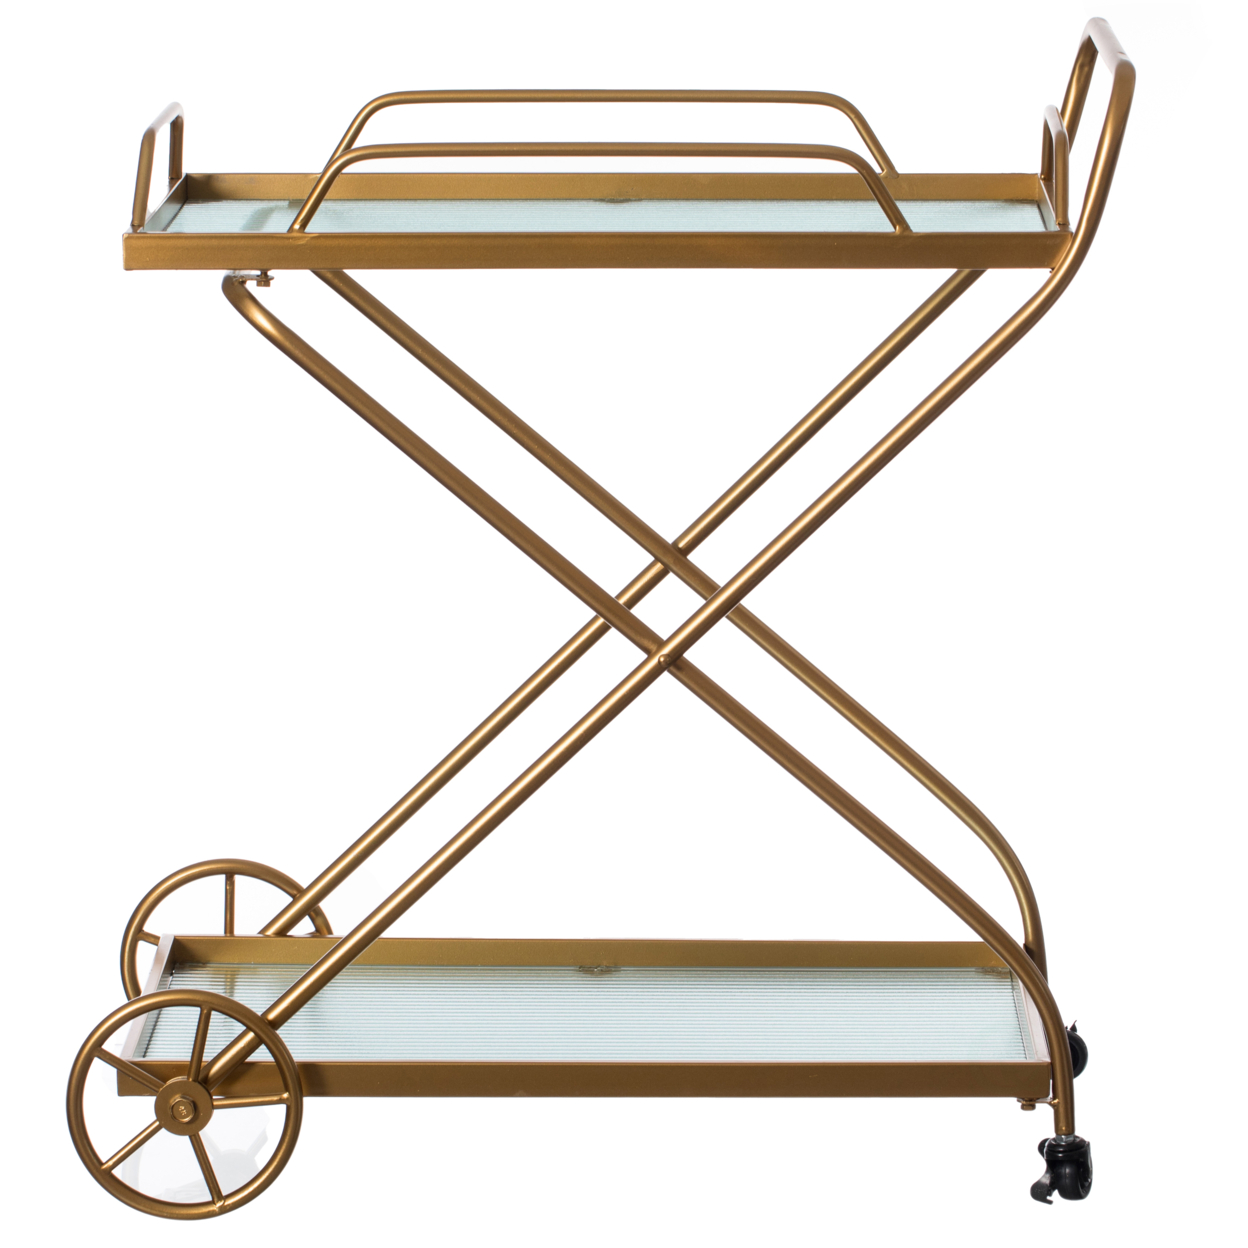 Gold Metal Wine Bar Serving Cart With Rolling Wheels And Handles For Dining, Living Room Or Entryway